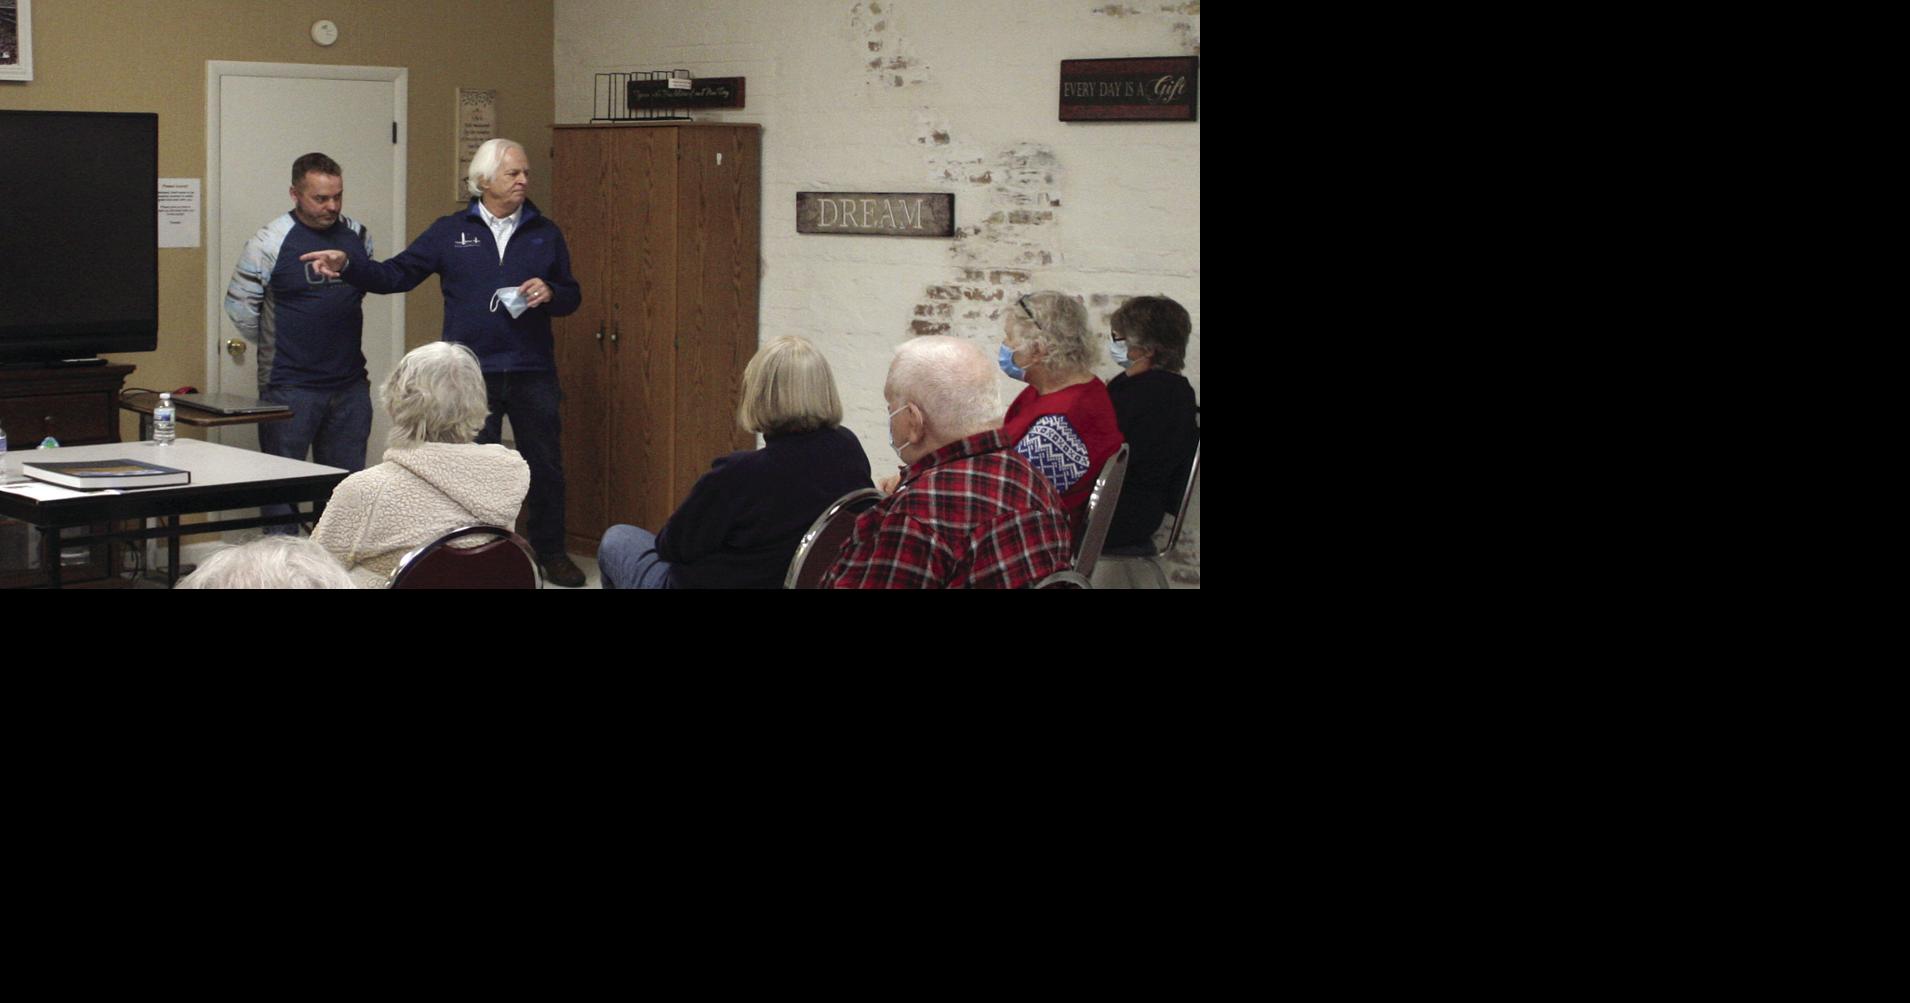 Todd and Brad Reed talk photography, more at Scottville Senior Center | News